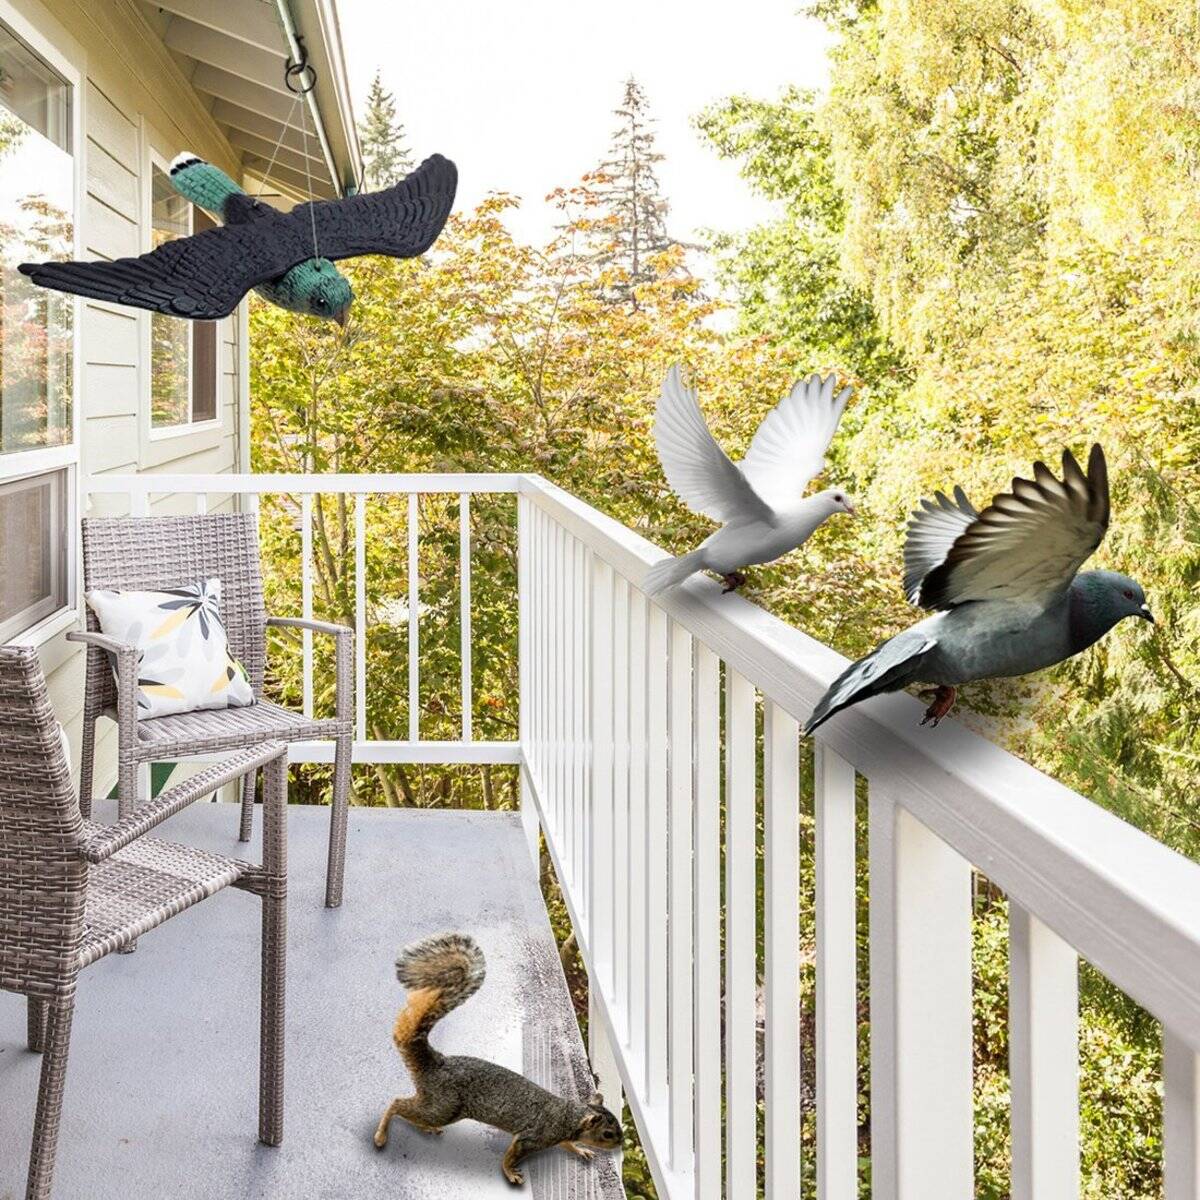 The Best (and Worst) Ways to Clean Bird Poop From Your Patio